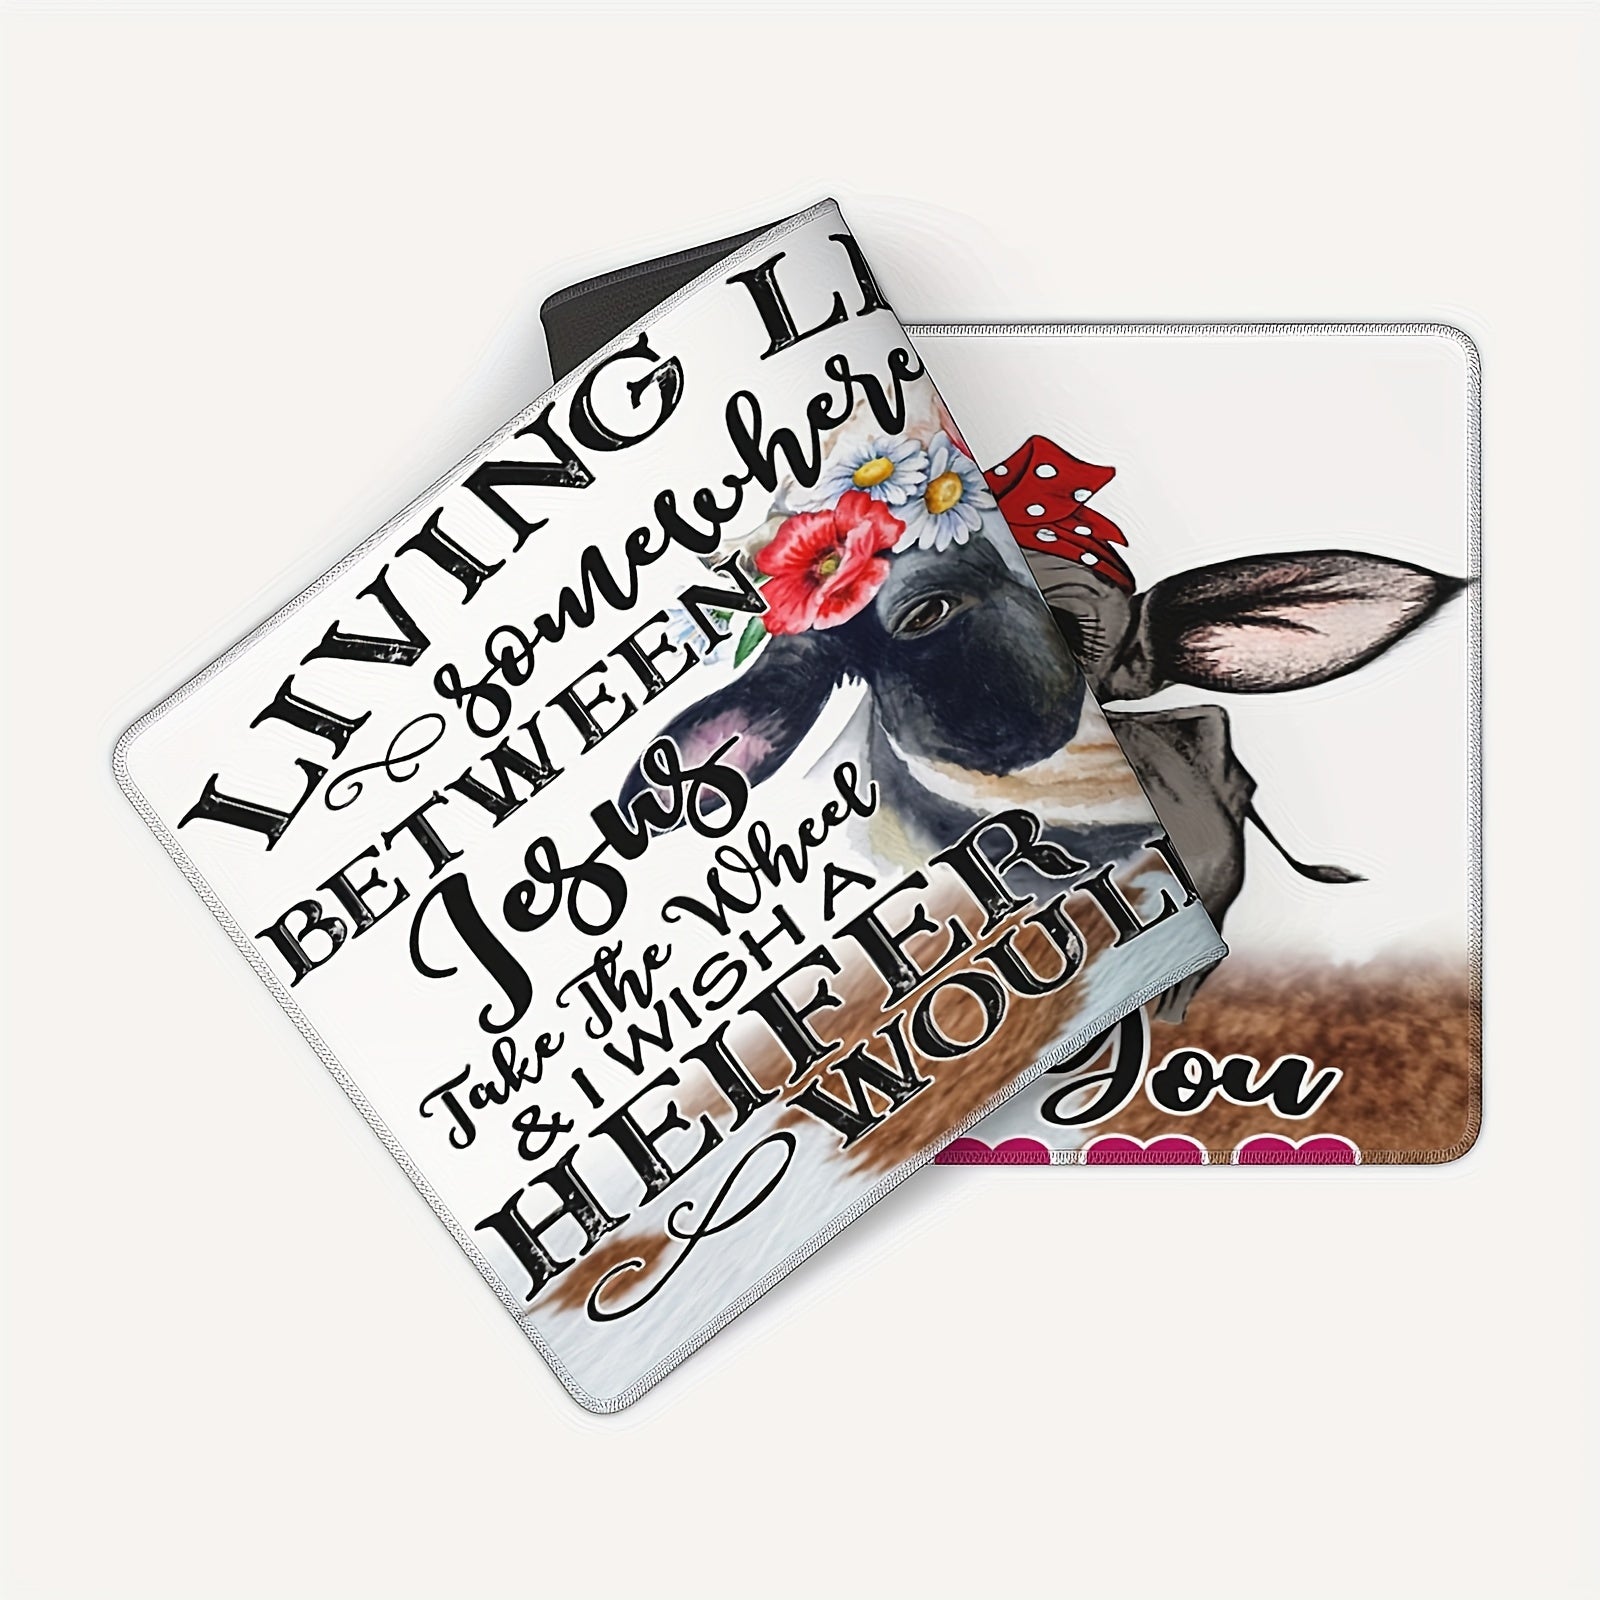 Living Life Somewhere Between Jesus Take The Wheel And I Wish A Heifer Would Computer Keyboard Mouse Pad 11.8x31.5 claimedbygoddesigns